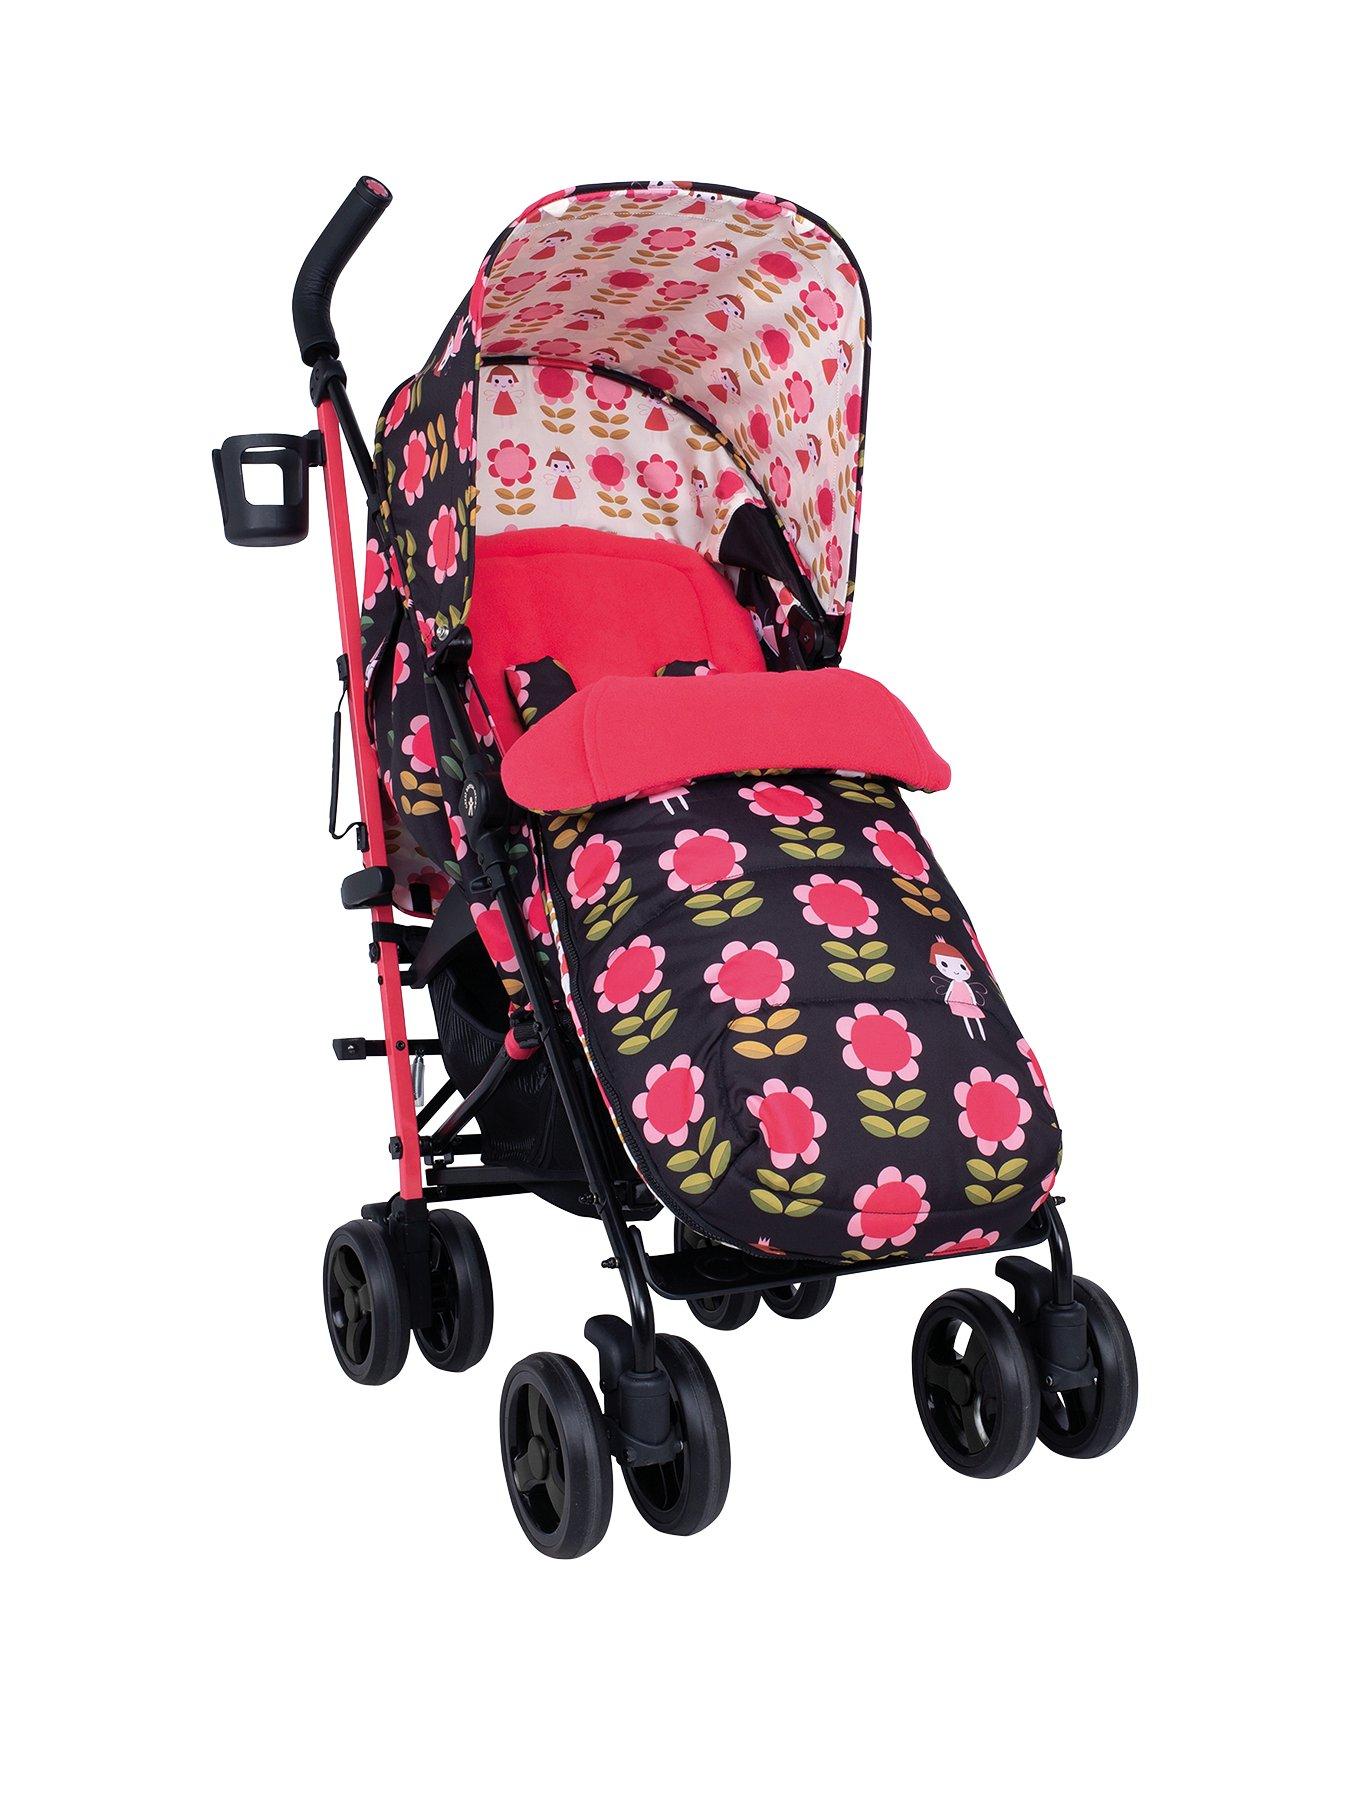 strollers and pushchairs uk